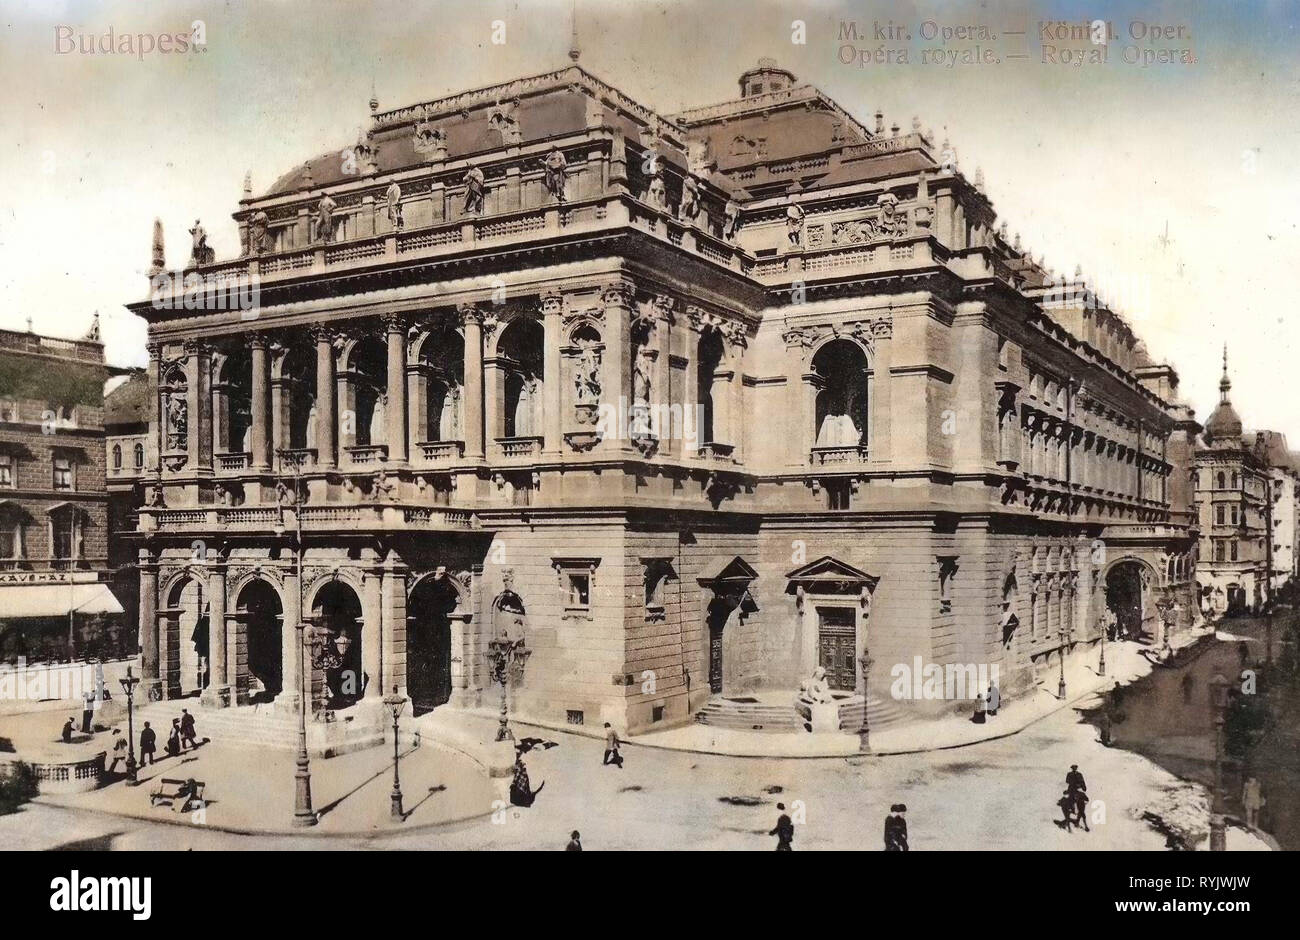 Historical images of the Hungarian State Opera House, 1911, Budapest, Königliche Oper, Hungary Stock Photo